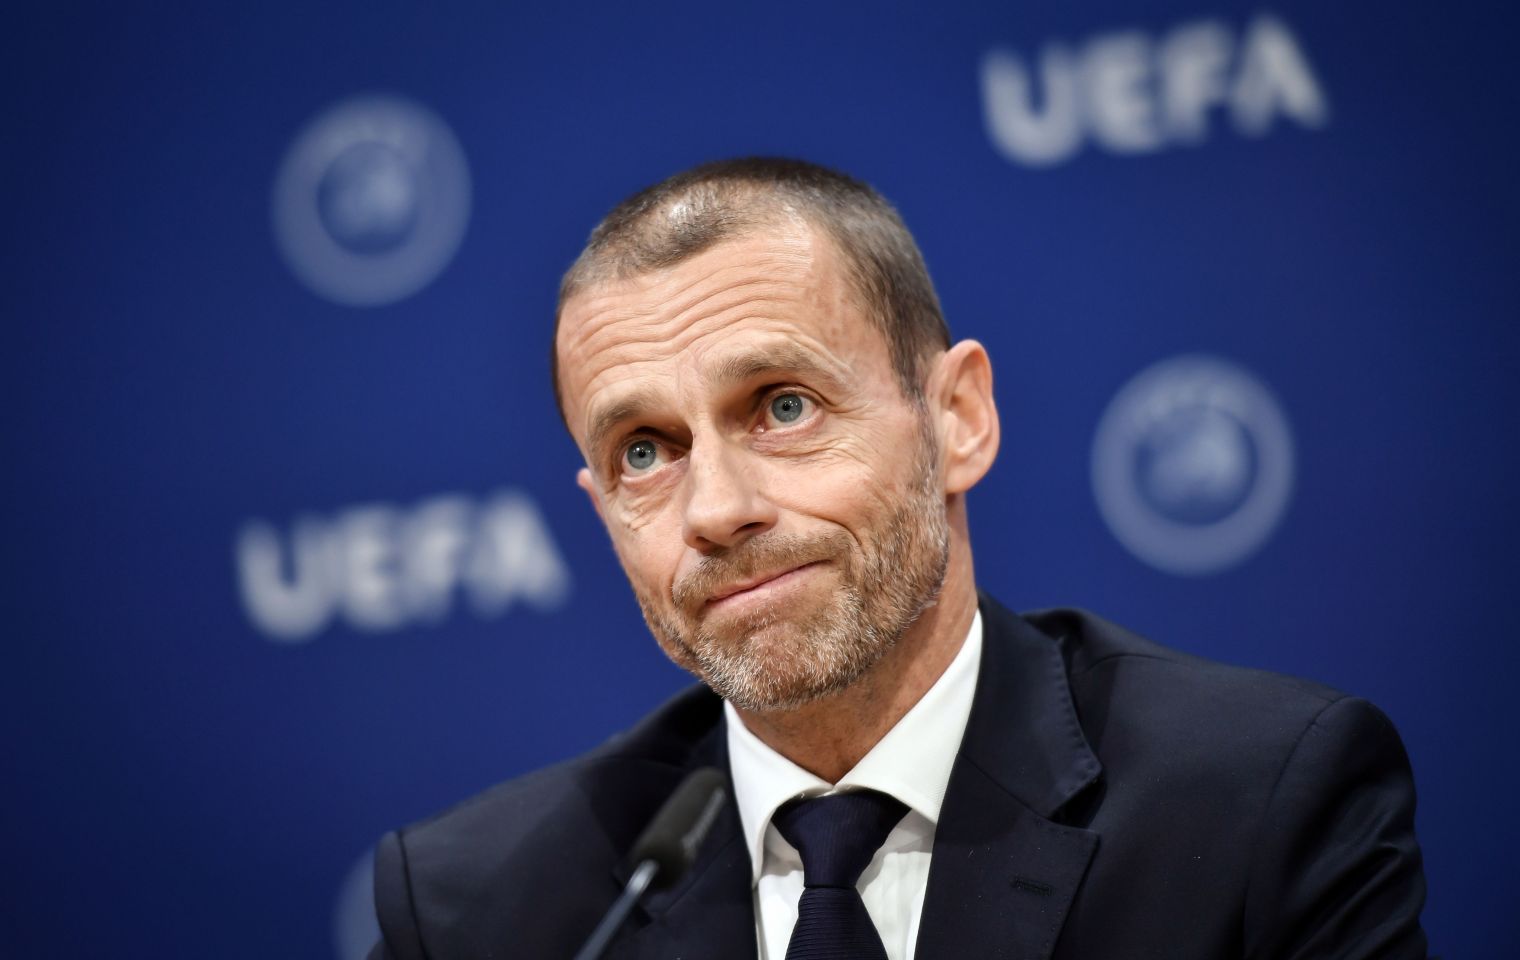 As widely anticipated, Juventus have been excluded from the 2023/2024 edition of the European Conference League. UEFA communicated its decision Friday